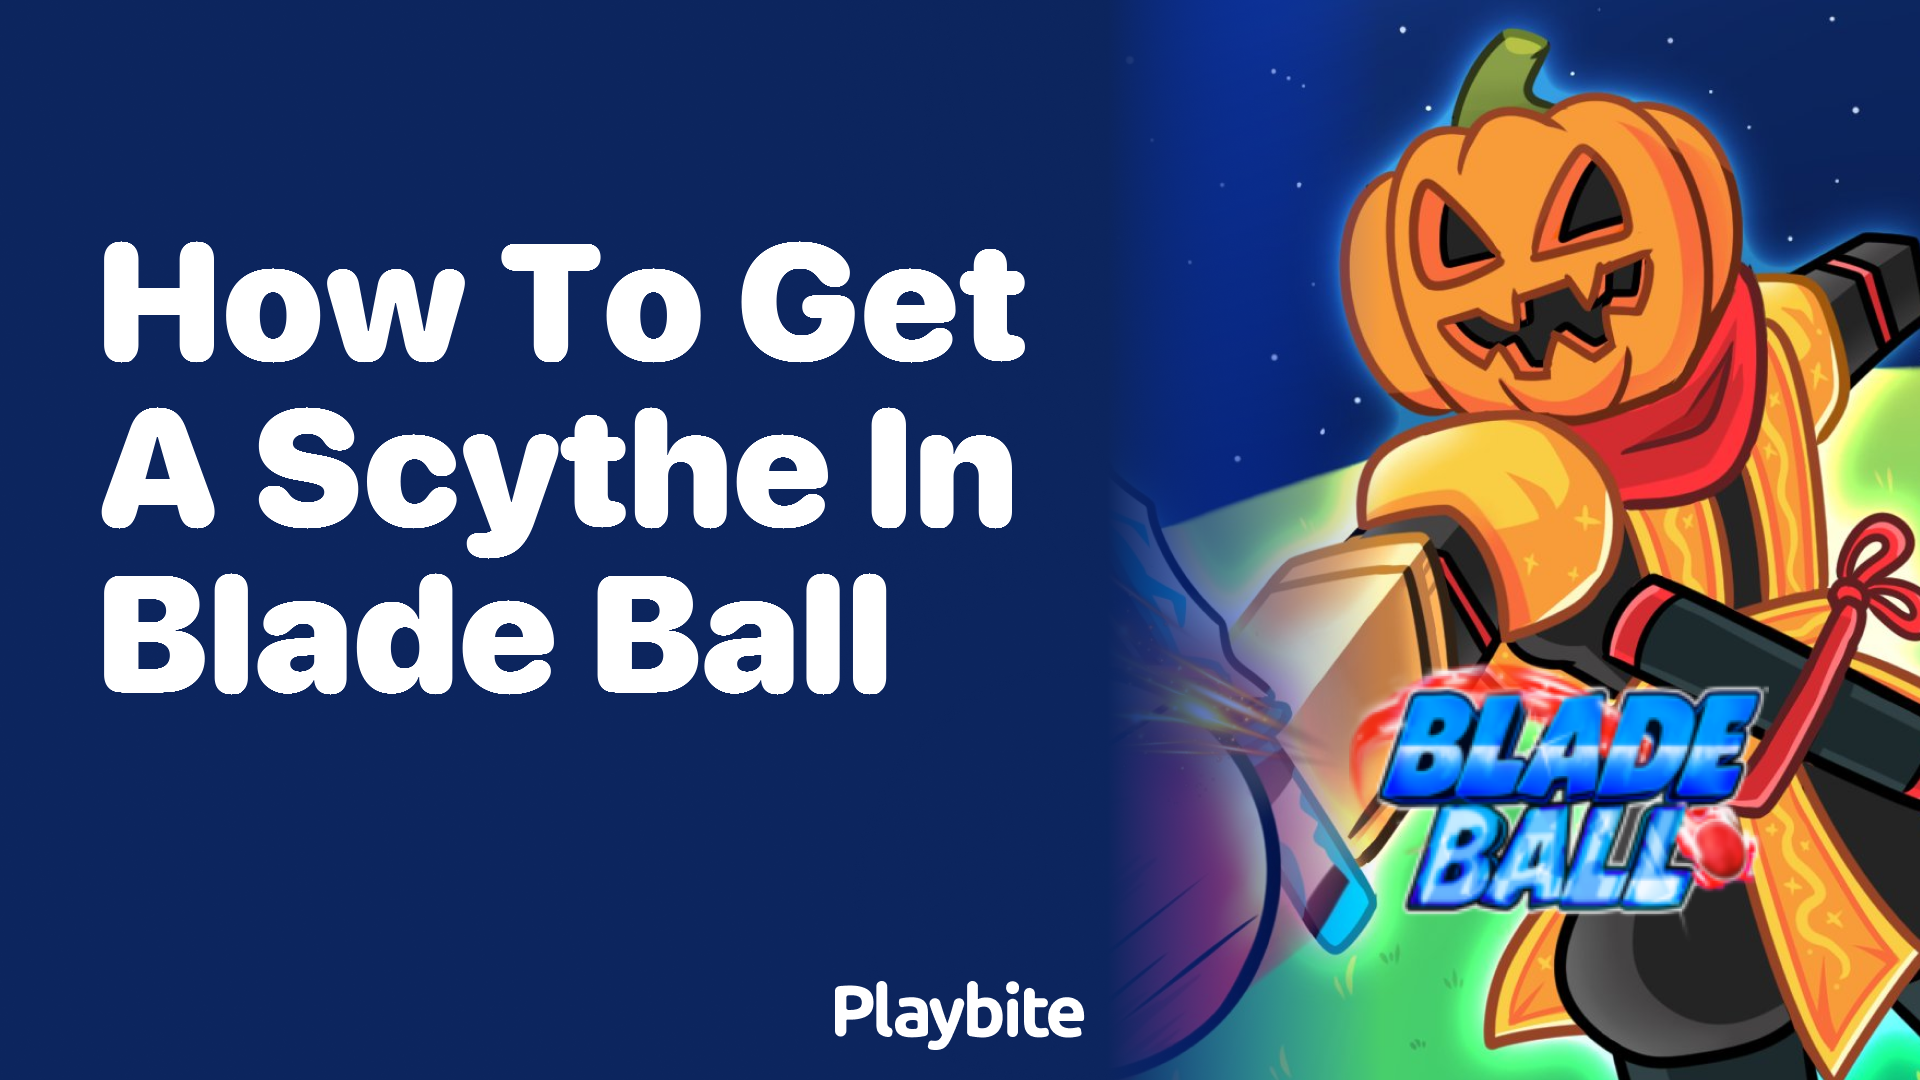 How to Get a Scythe in Blade Ball: A Quick Guide